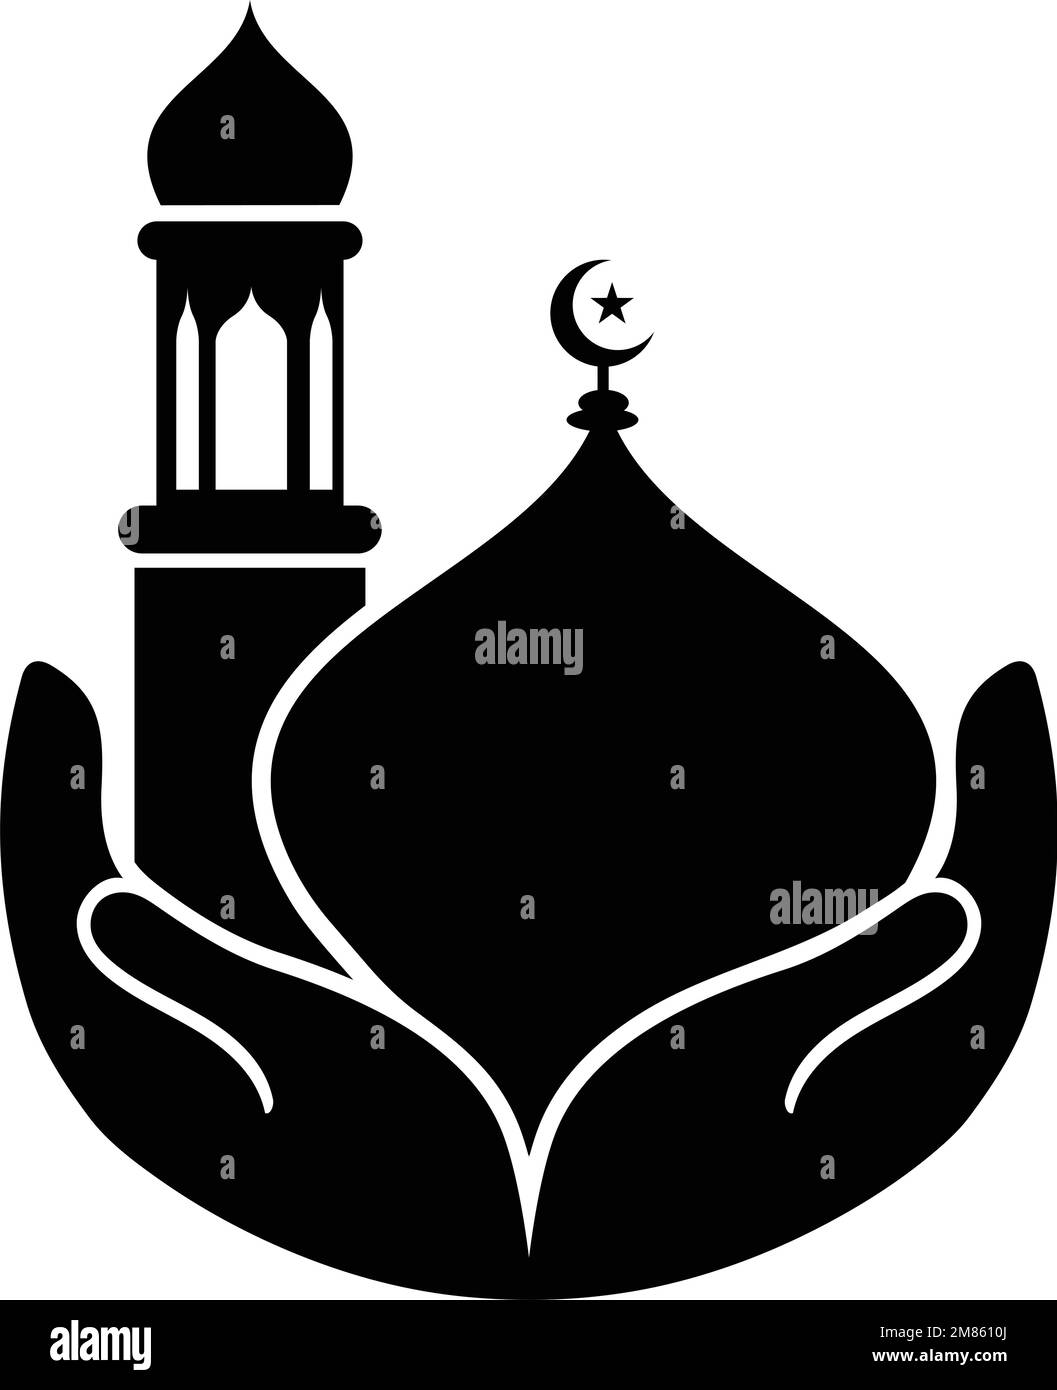 Two Hands holding mosque dome with minar icon vector. Islamic Festival related icon. Stock Vector